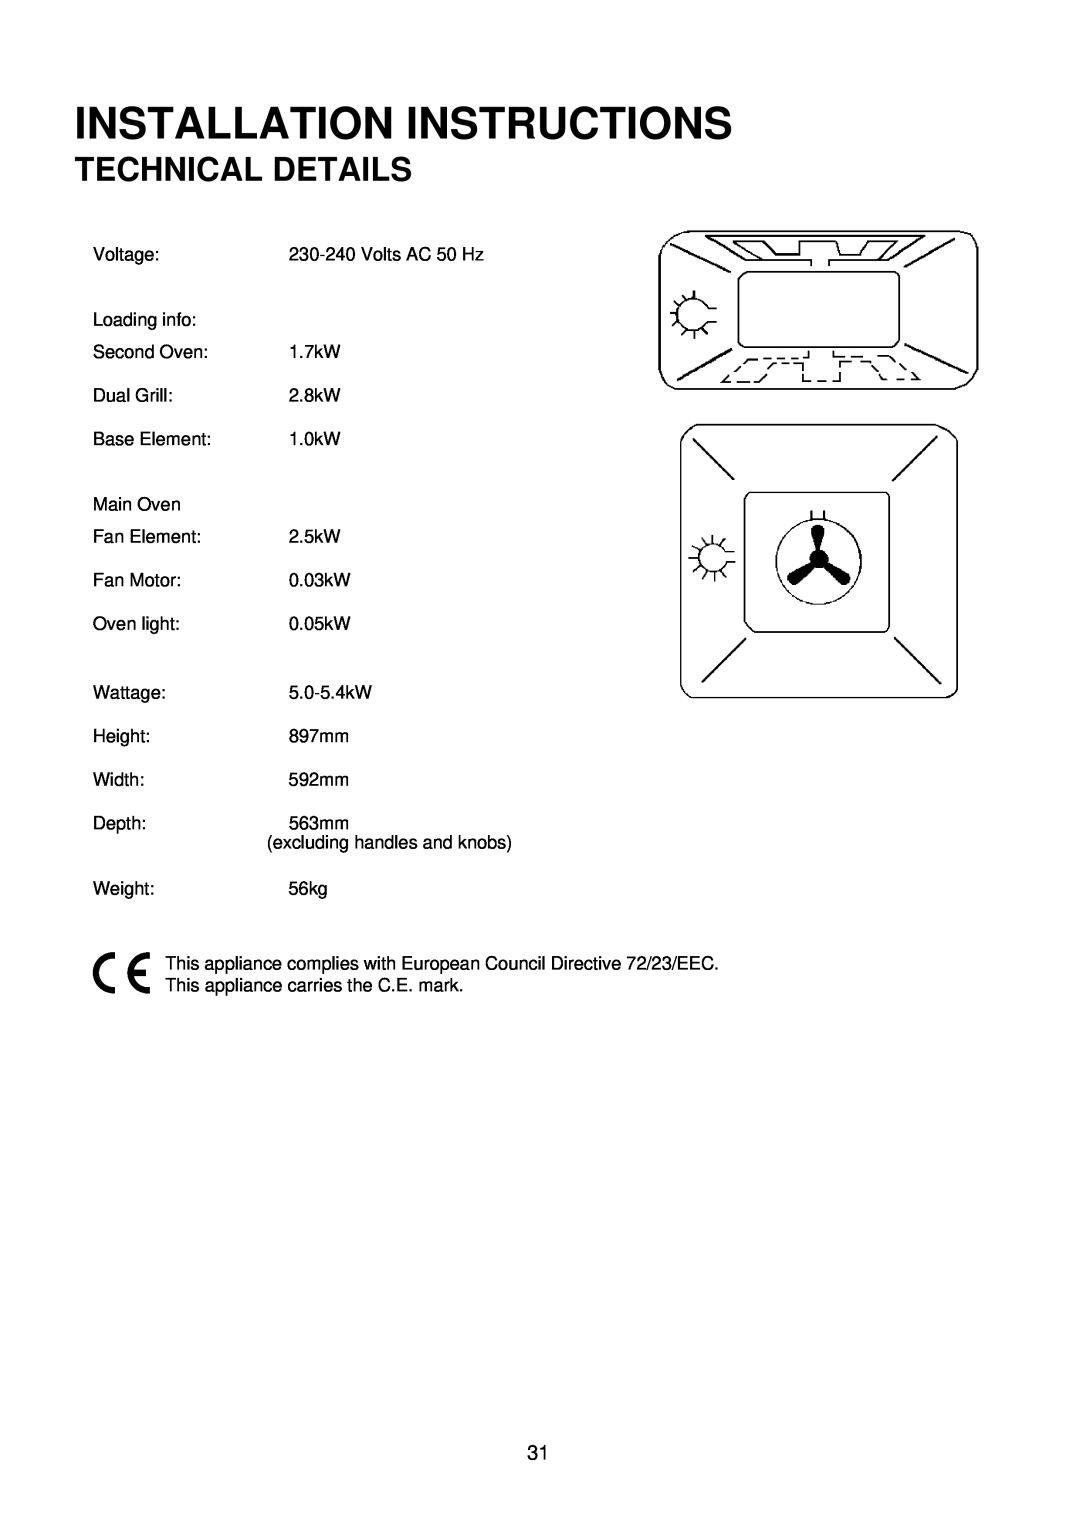 Electrolux D2160-1 operating instructions Installation Instructions, Technical Details 